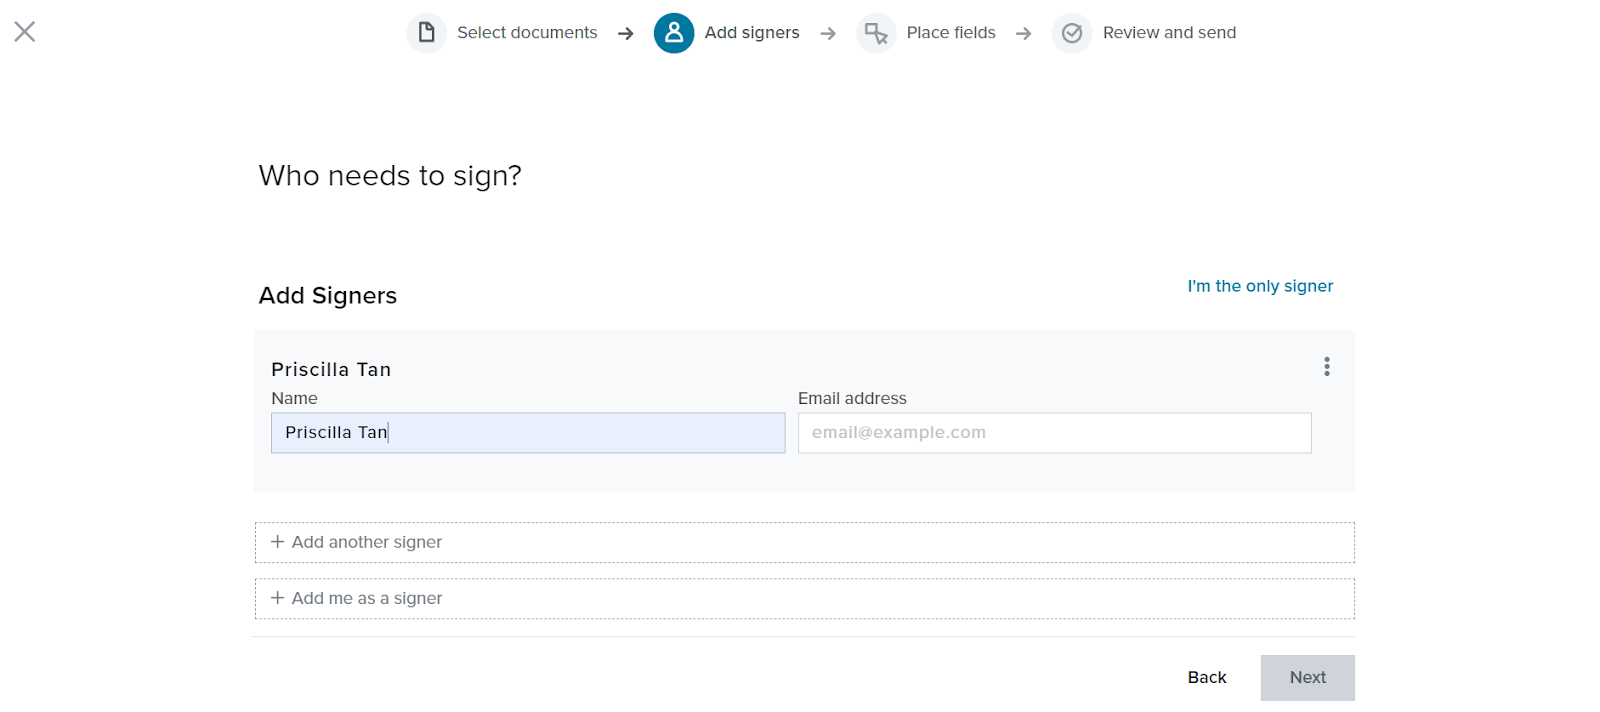 Add signers including your own